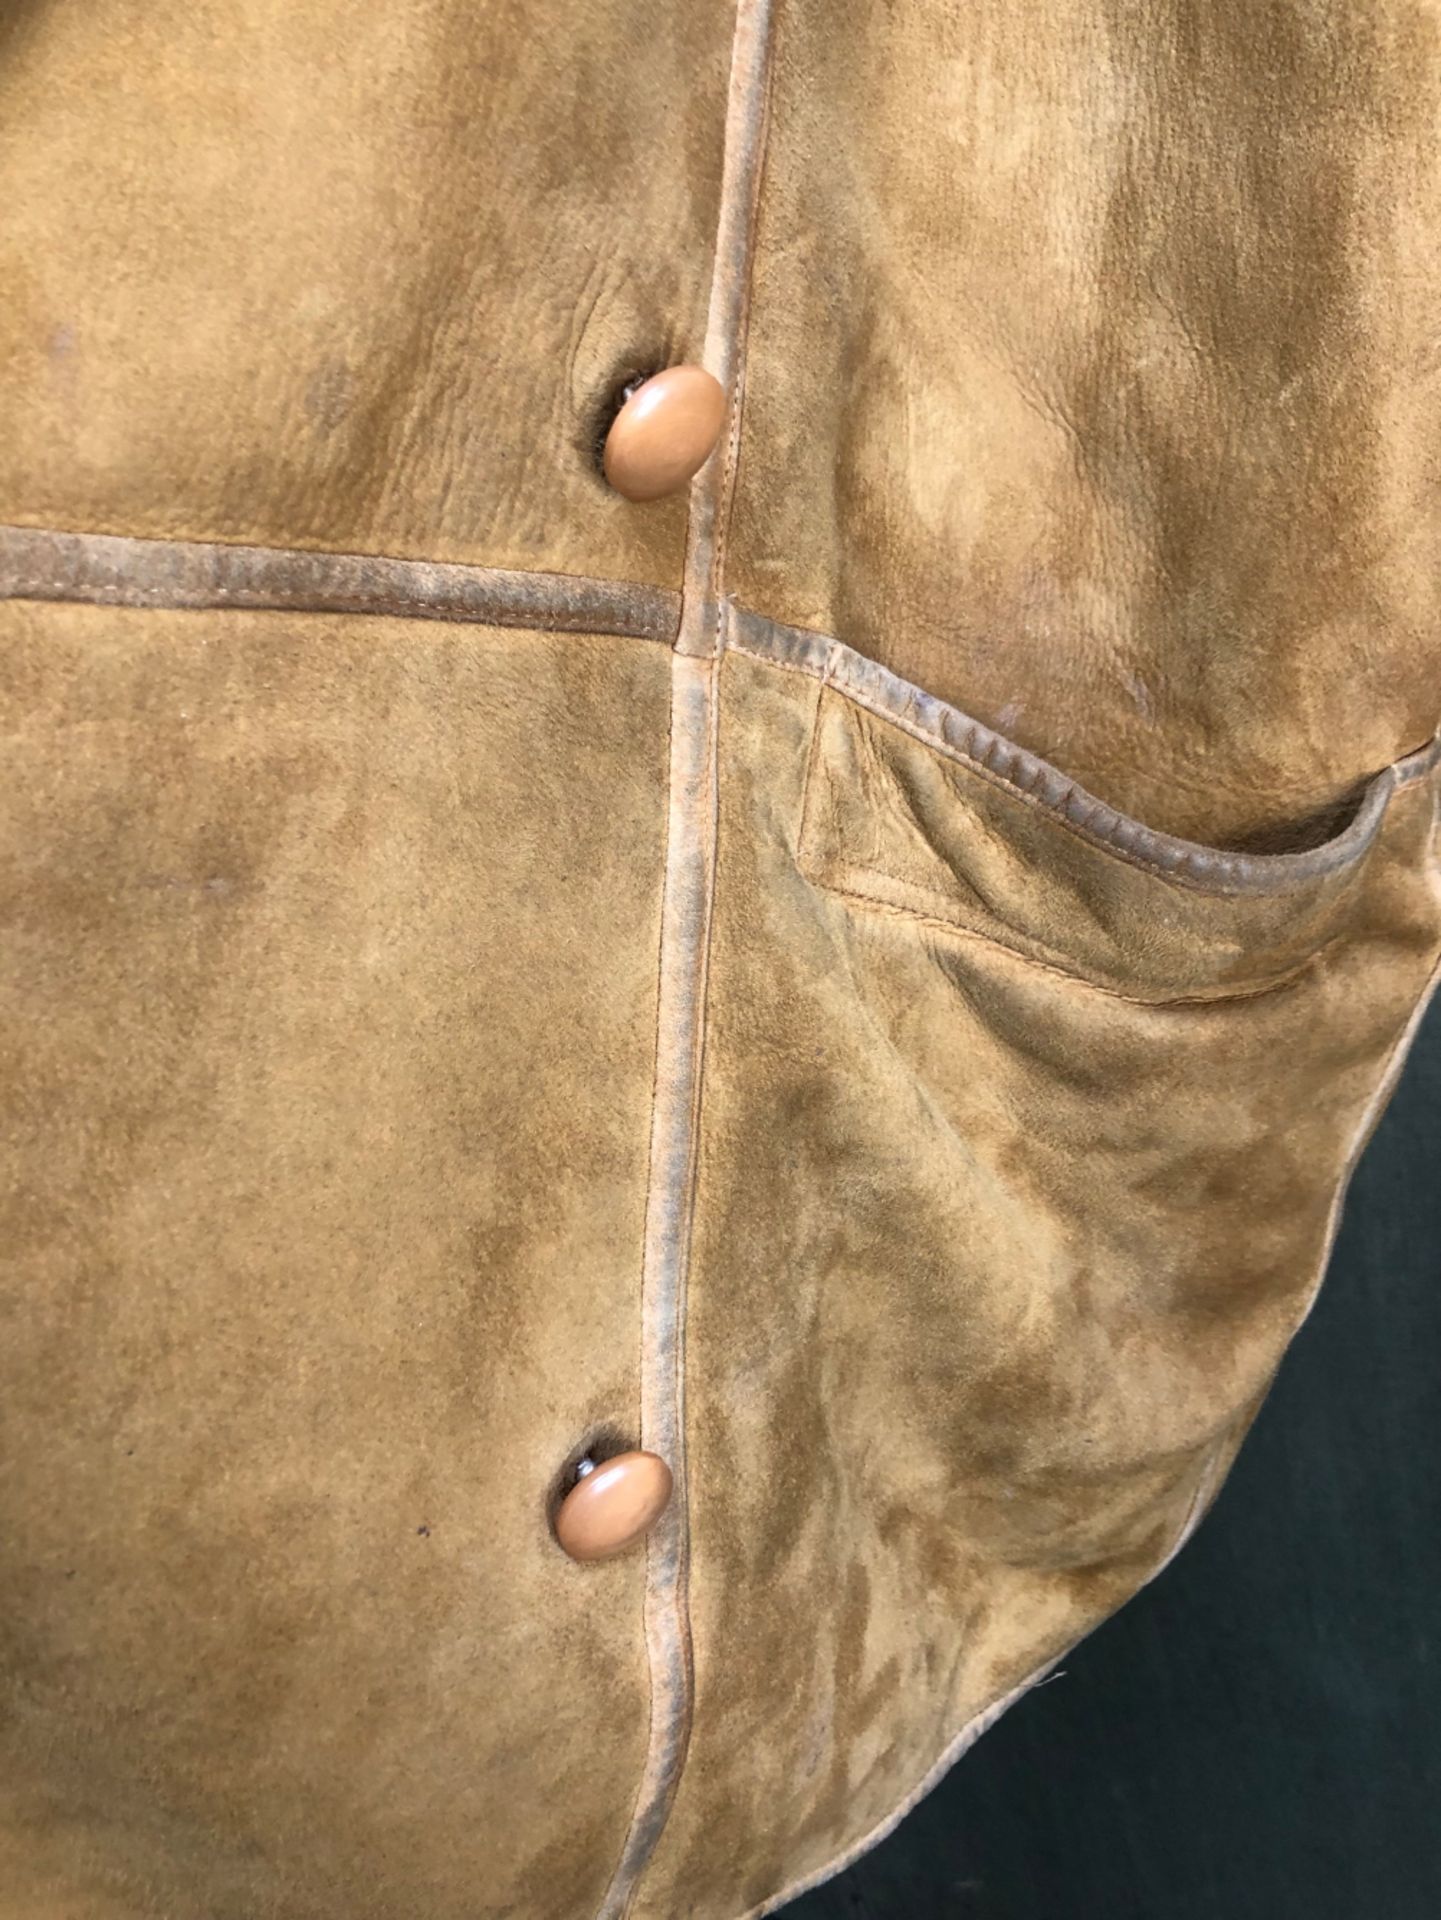 JACKETS: STRIWA 3/4 LENGTH FAWN COLOURED SHEEP SKIN JACKET WITH HOOD SIZE STATED EUR 36, TOGETHER - Image 17 of 21